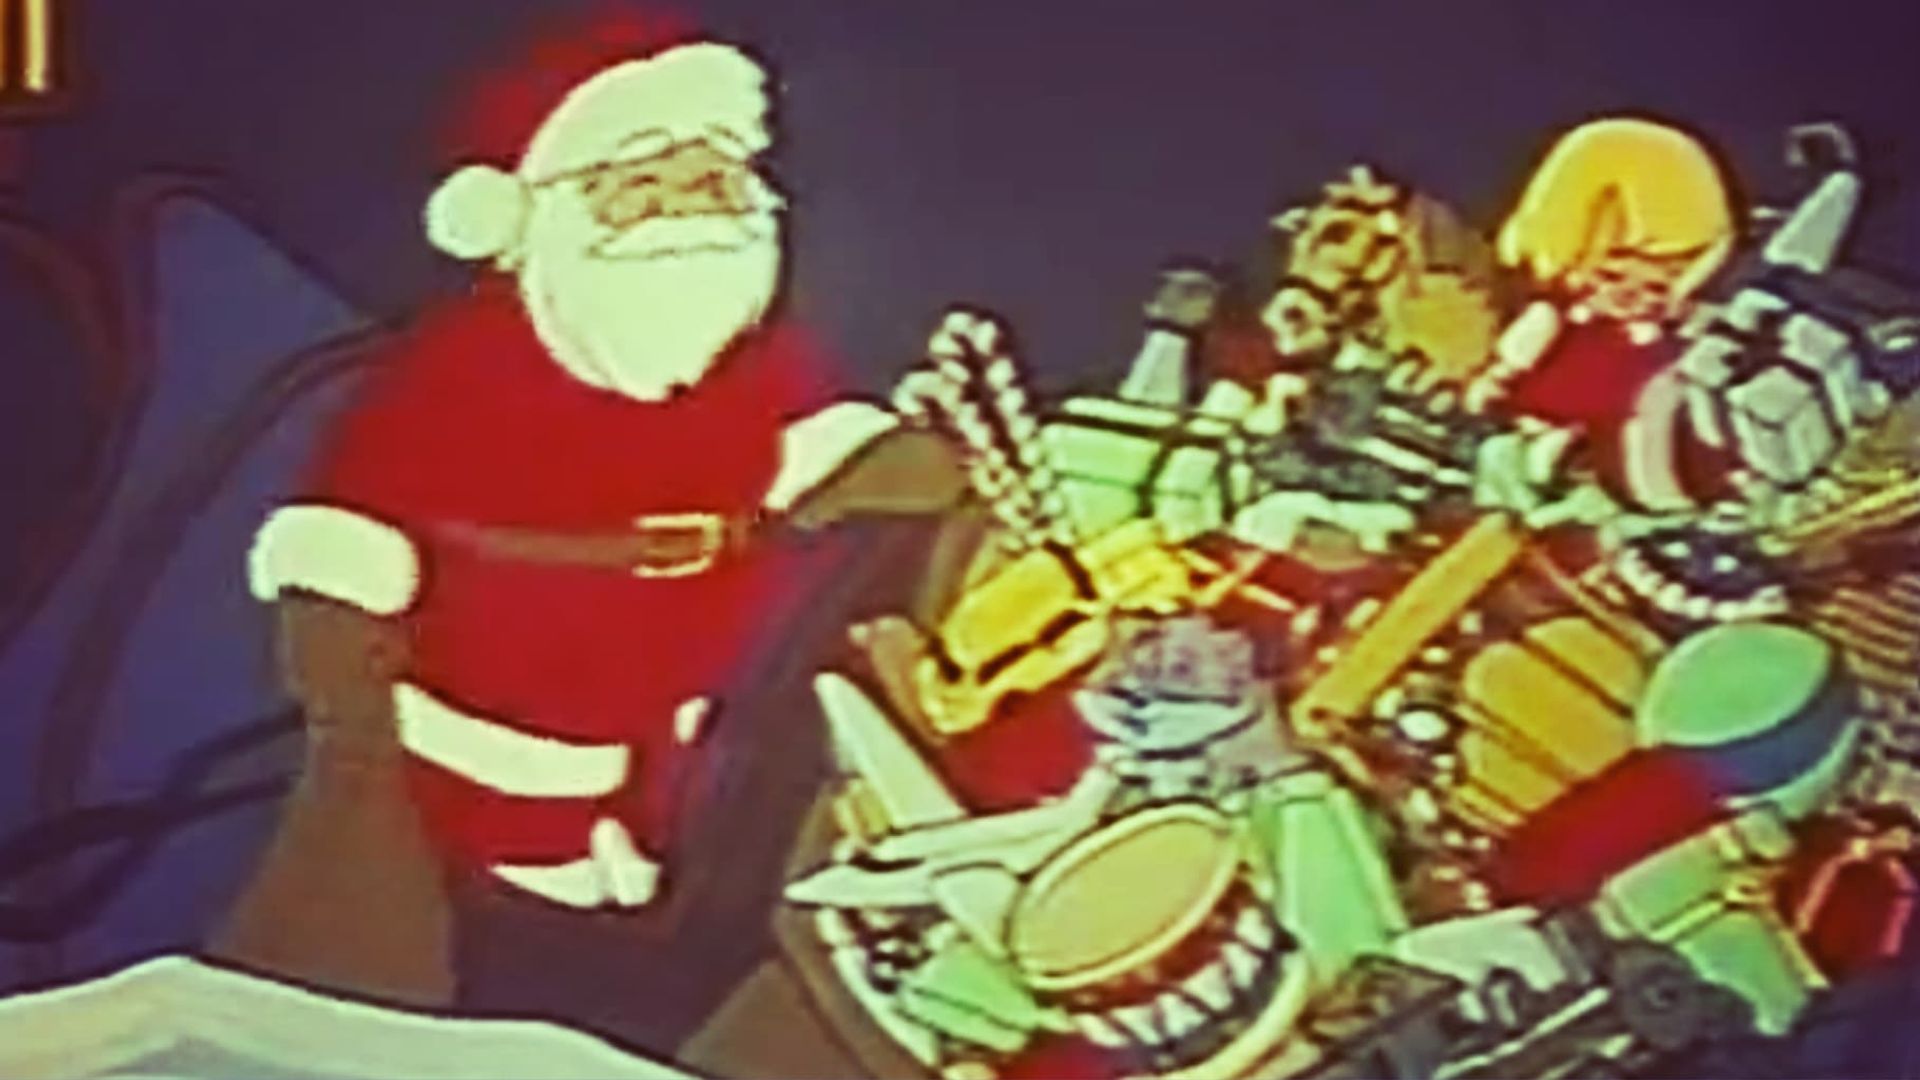 Story of the Christmas Toys as told by Mel Torme background